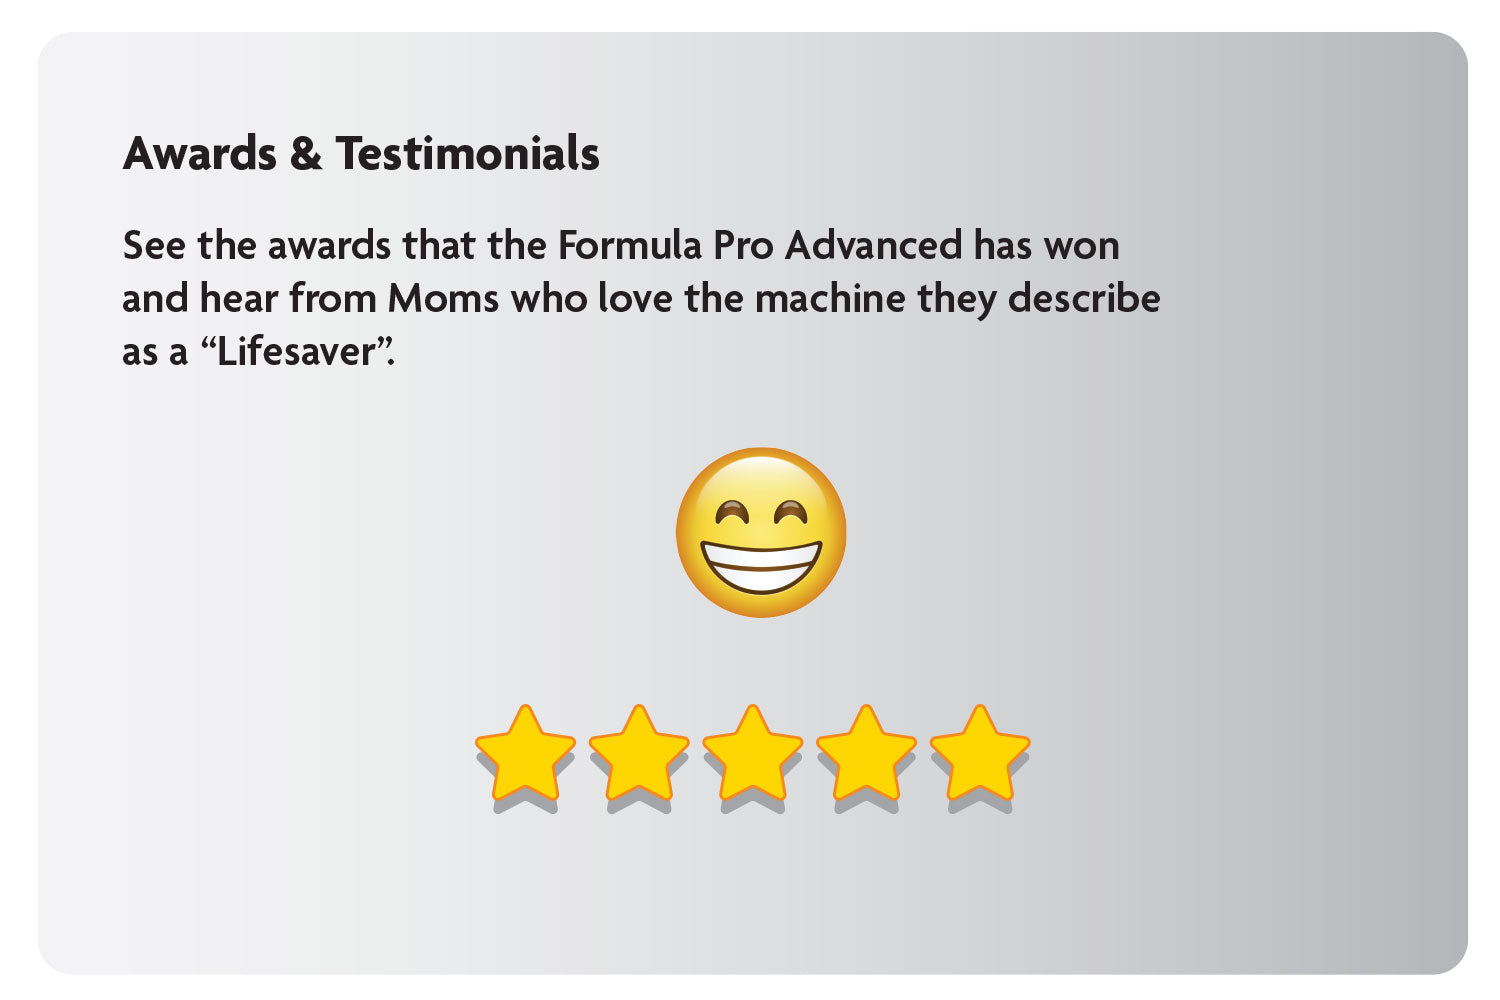 Awards & Testimonials: See the awards that the Formula Pro Advanced has won and hear from Moms who love the machine they describe as a “Lifesaver”.